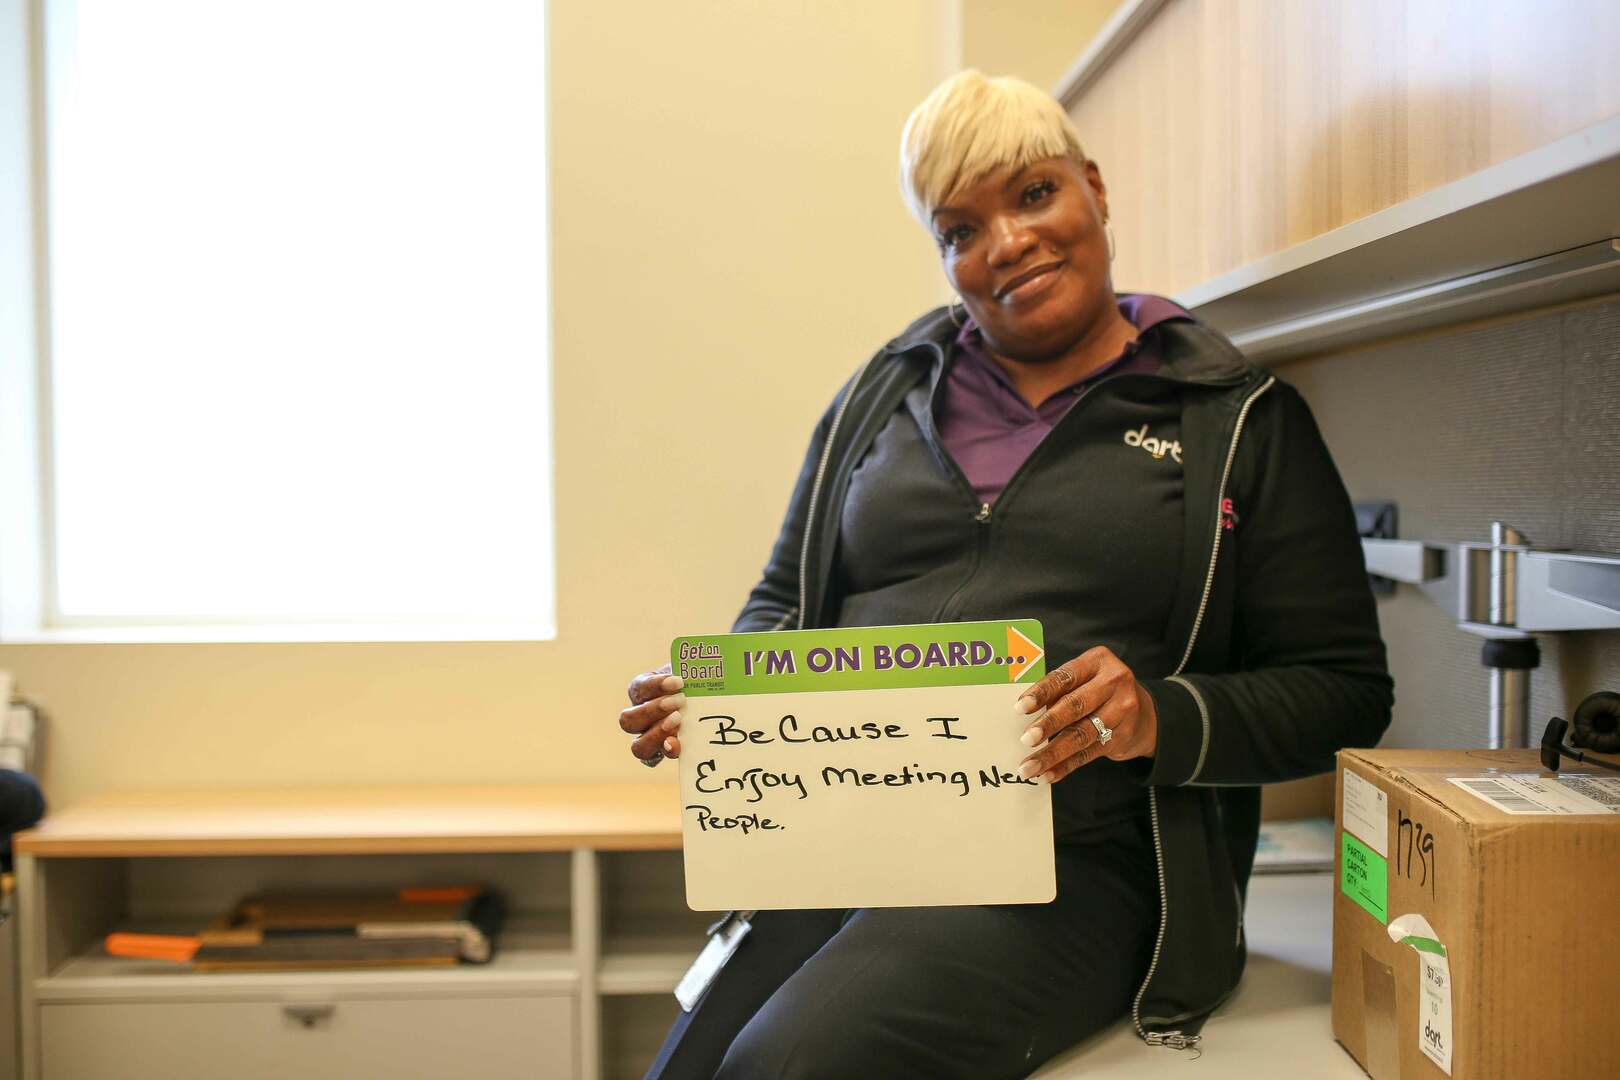 Woman rests against desk hold sign reading "I'm on board because I enjoy meeting new people."